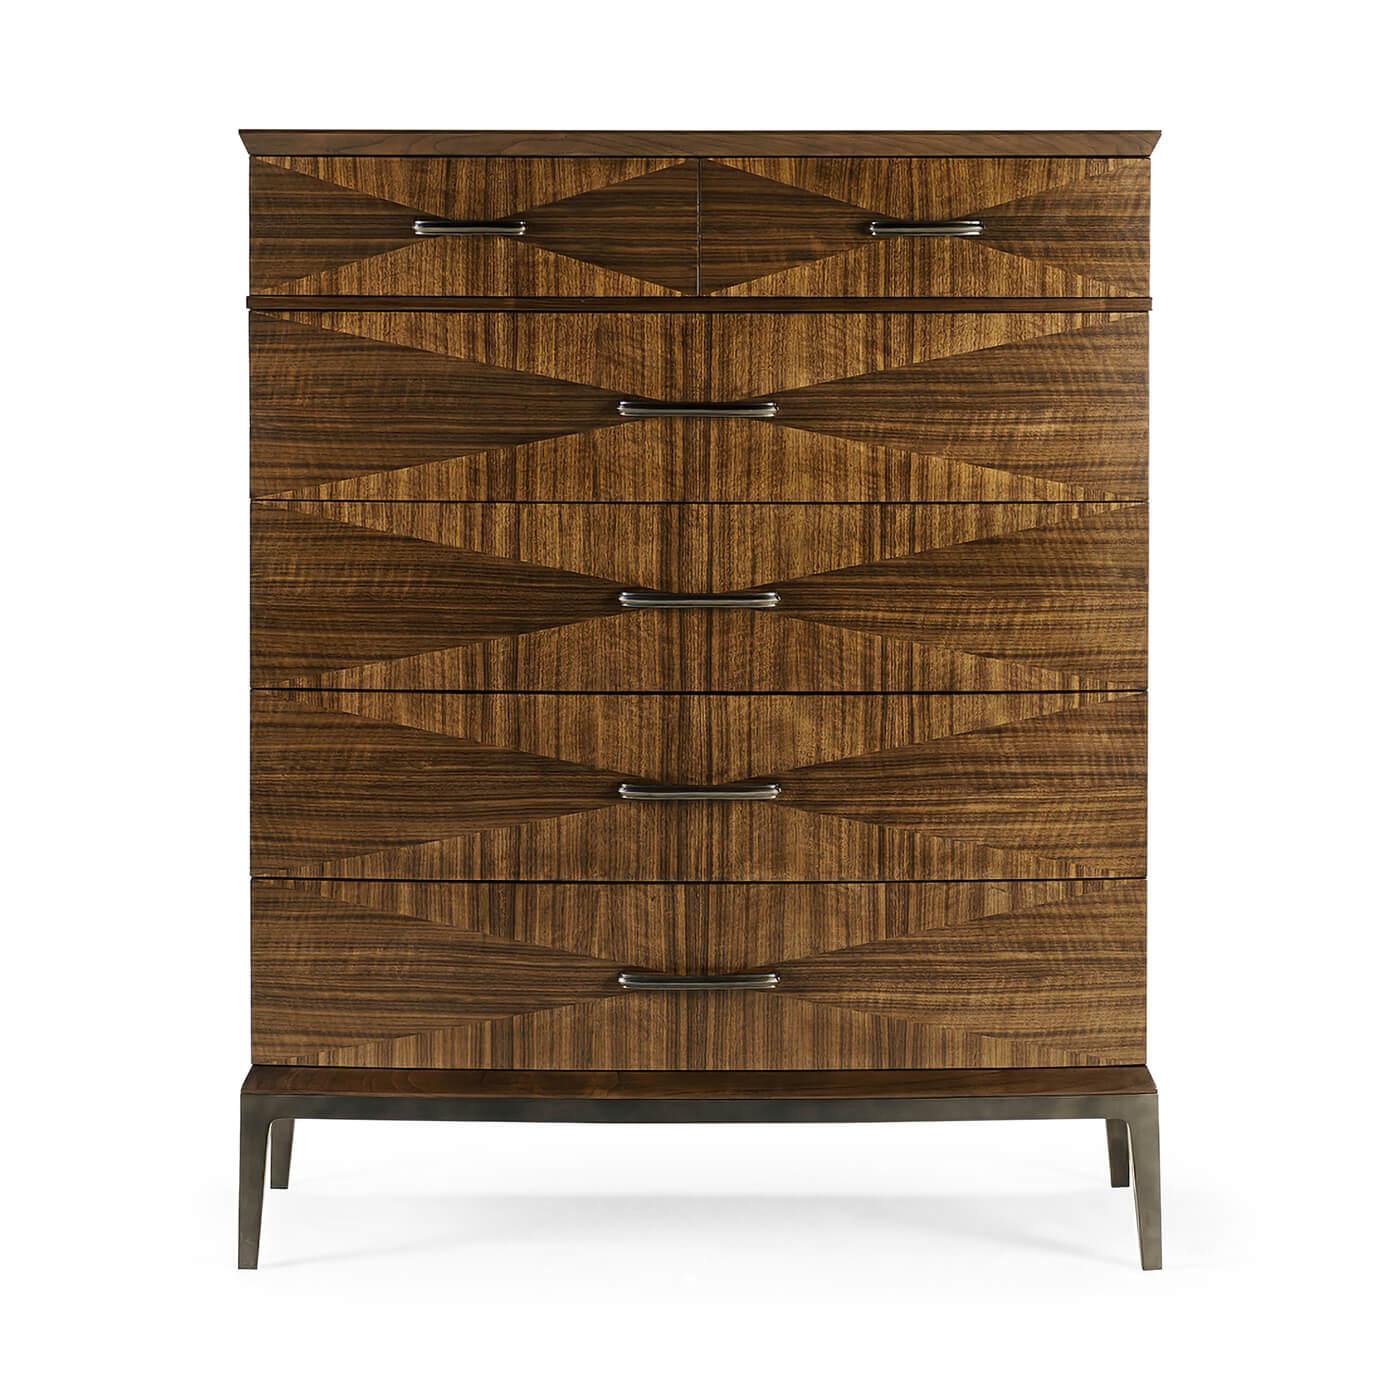 A Mid-Century Modern style tall chest of drawers, constructed of American walnut with a transparent, lacquer finish. The six graduated drawer fronts feature walnut veneers in a box match pattern. Hardware is cast from brass, acid dipped and